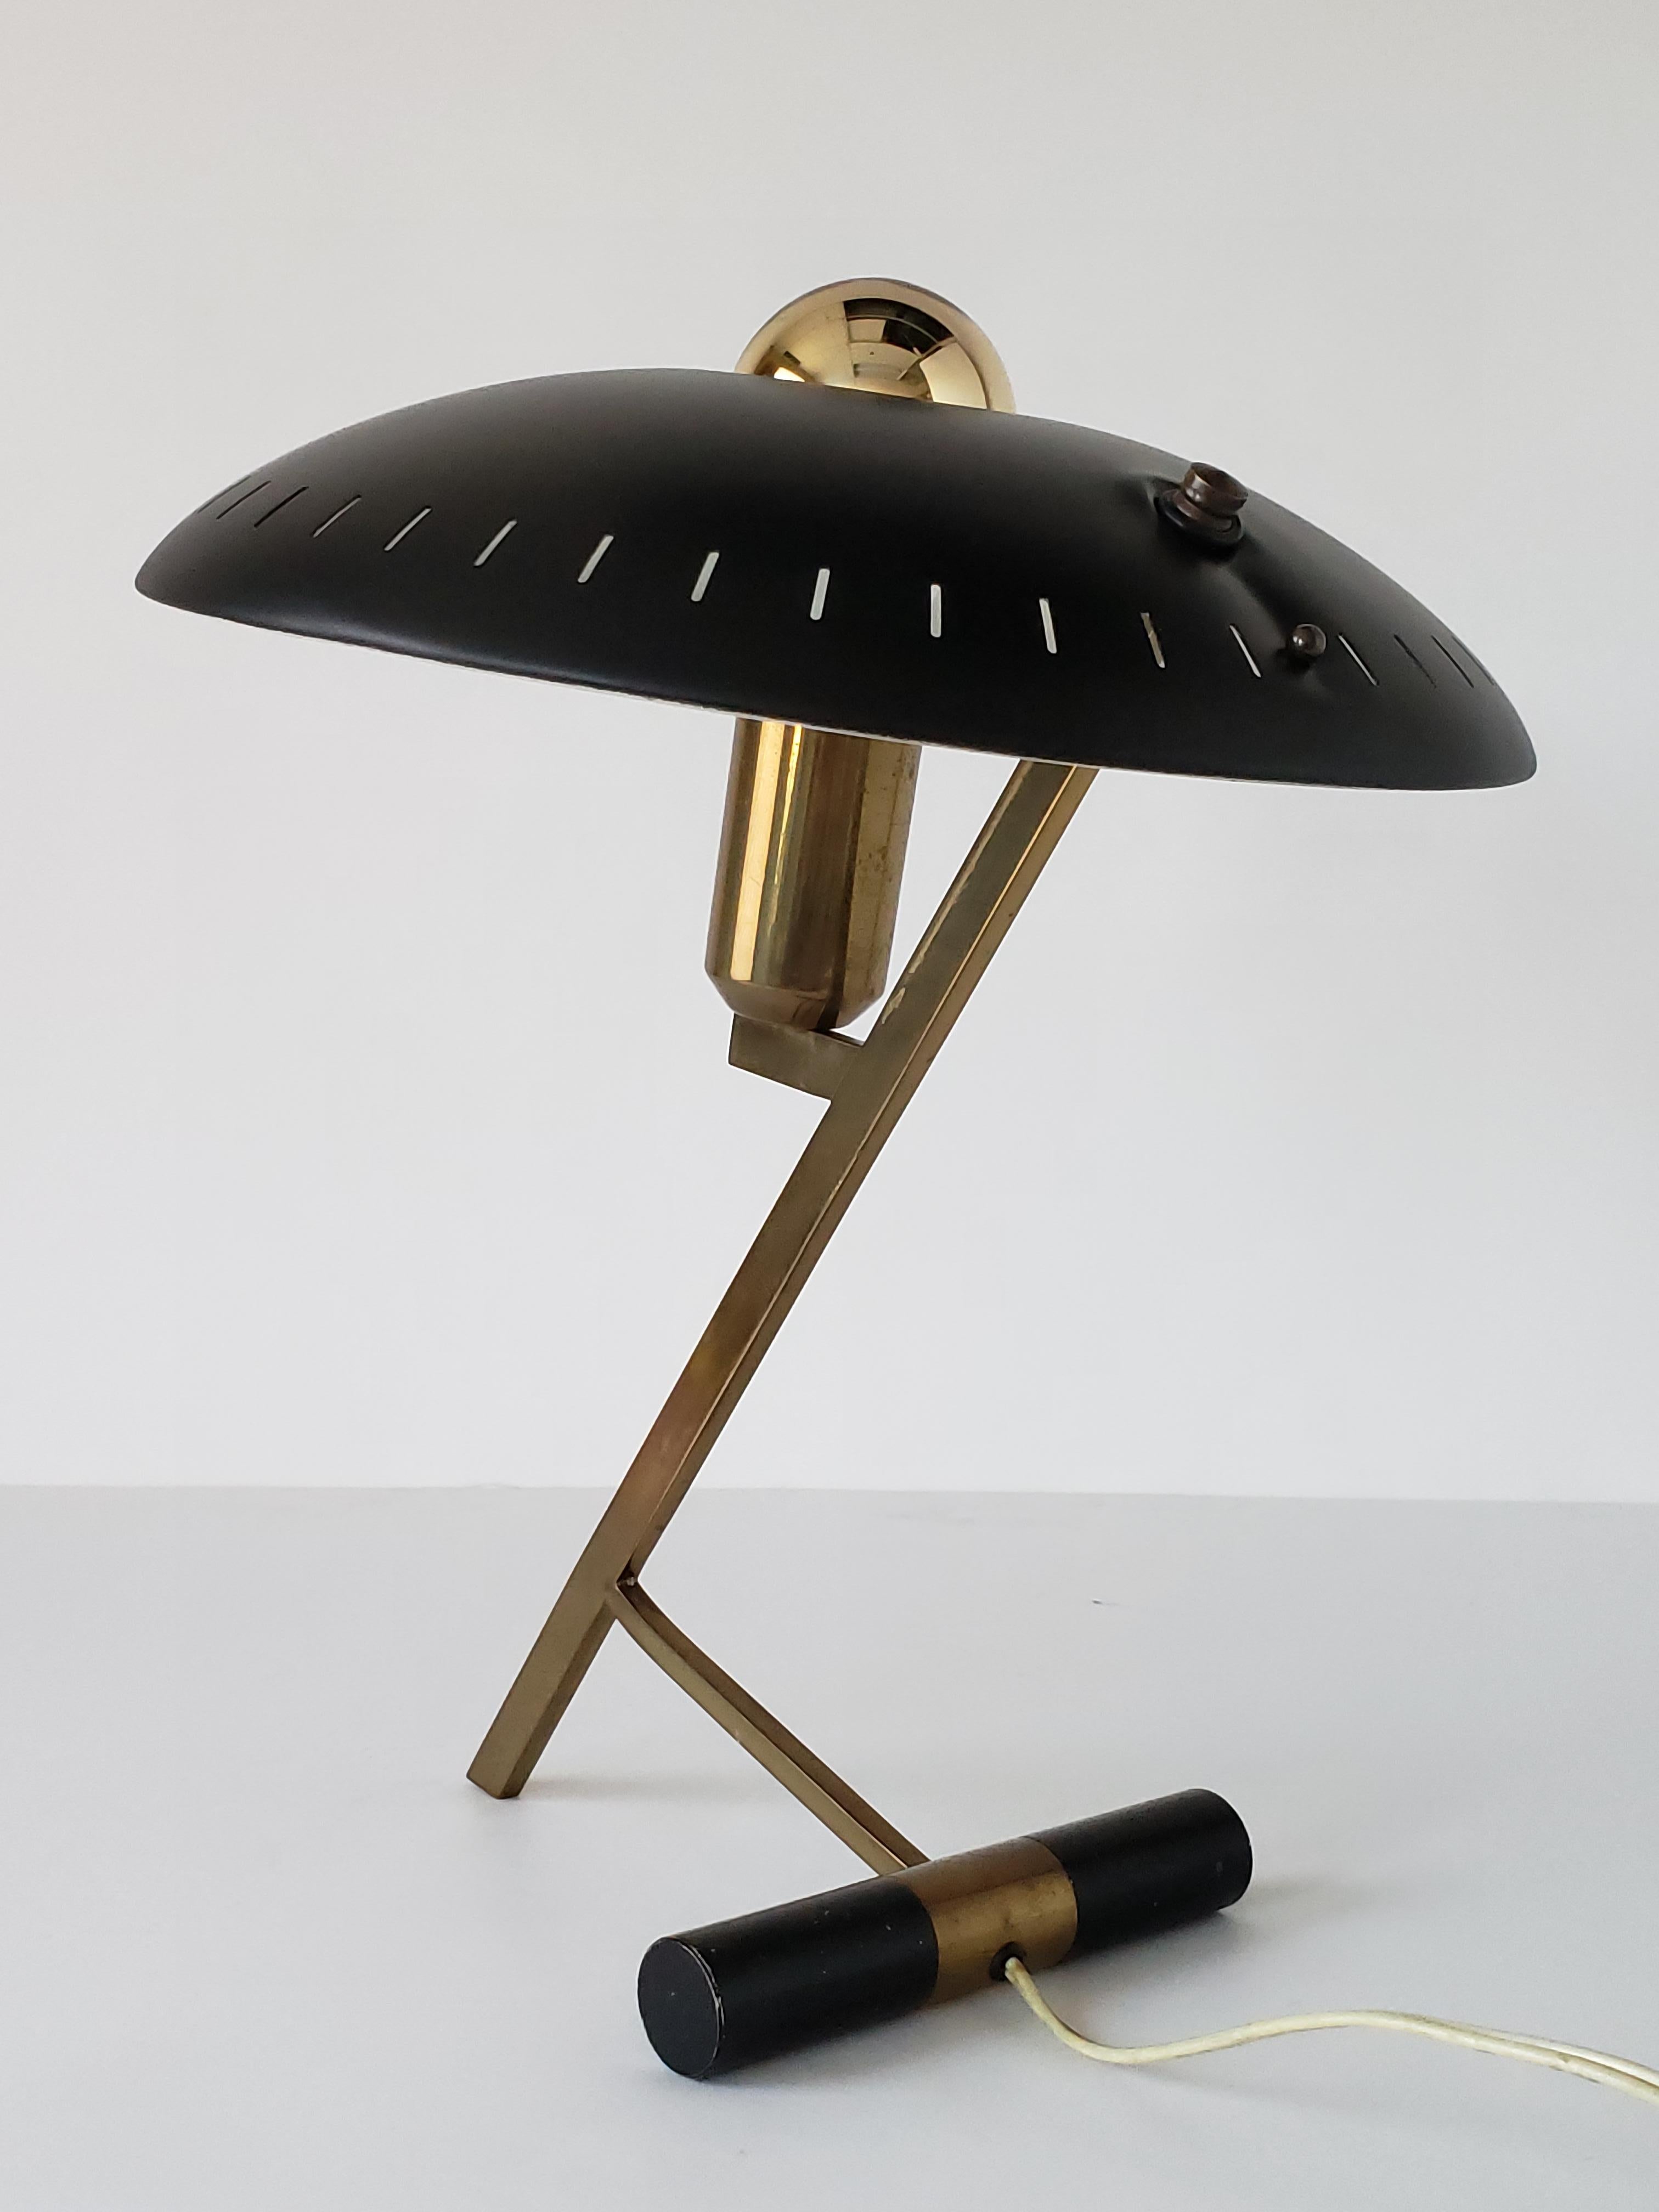 Iconic Dutch desk/table lamp by designer and architect Louis Kalff for the Philips Company. 

Enameled black aluminium shade sitting on a solid brass frame and base.

E27 socket rated at 60 watt. 

Displayed here with a gold top 60 watt light